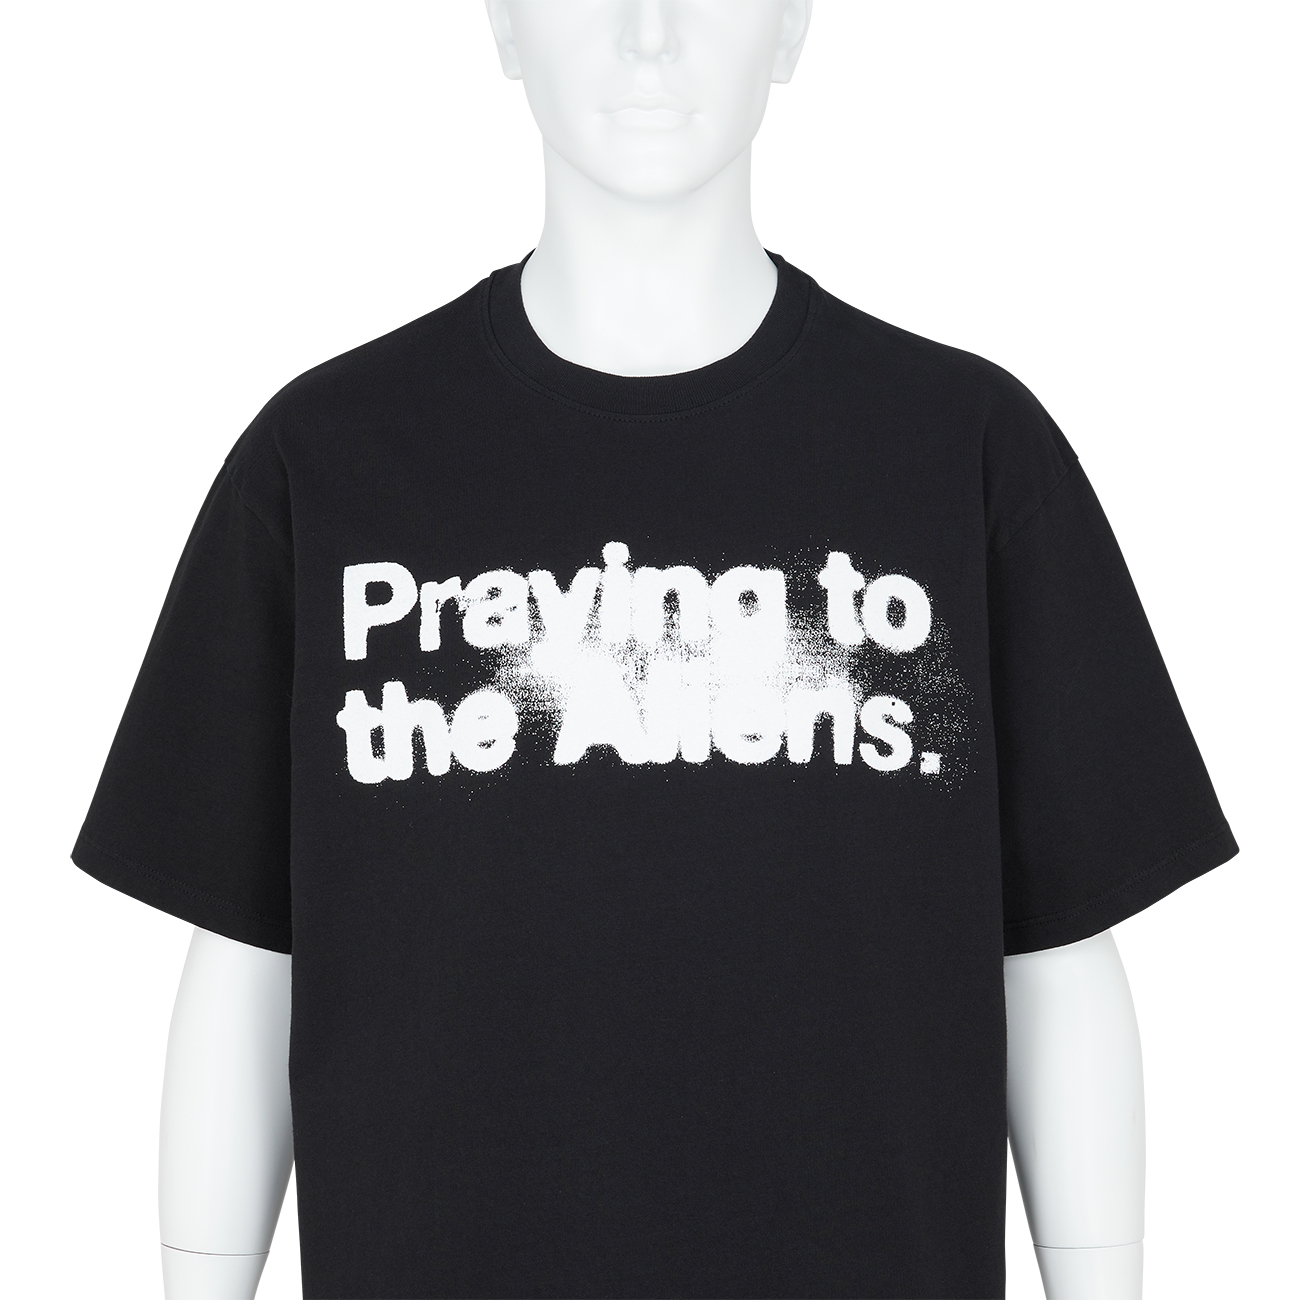 MARVIN (マーヴィン) - PRAYING TO THE ALIENS T-SHIRT BLACKの詳細画像2